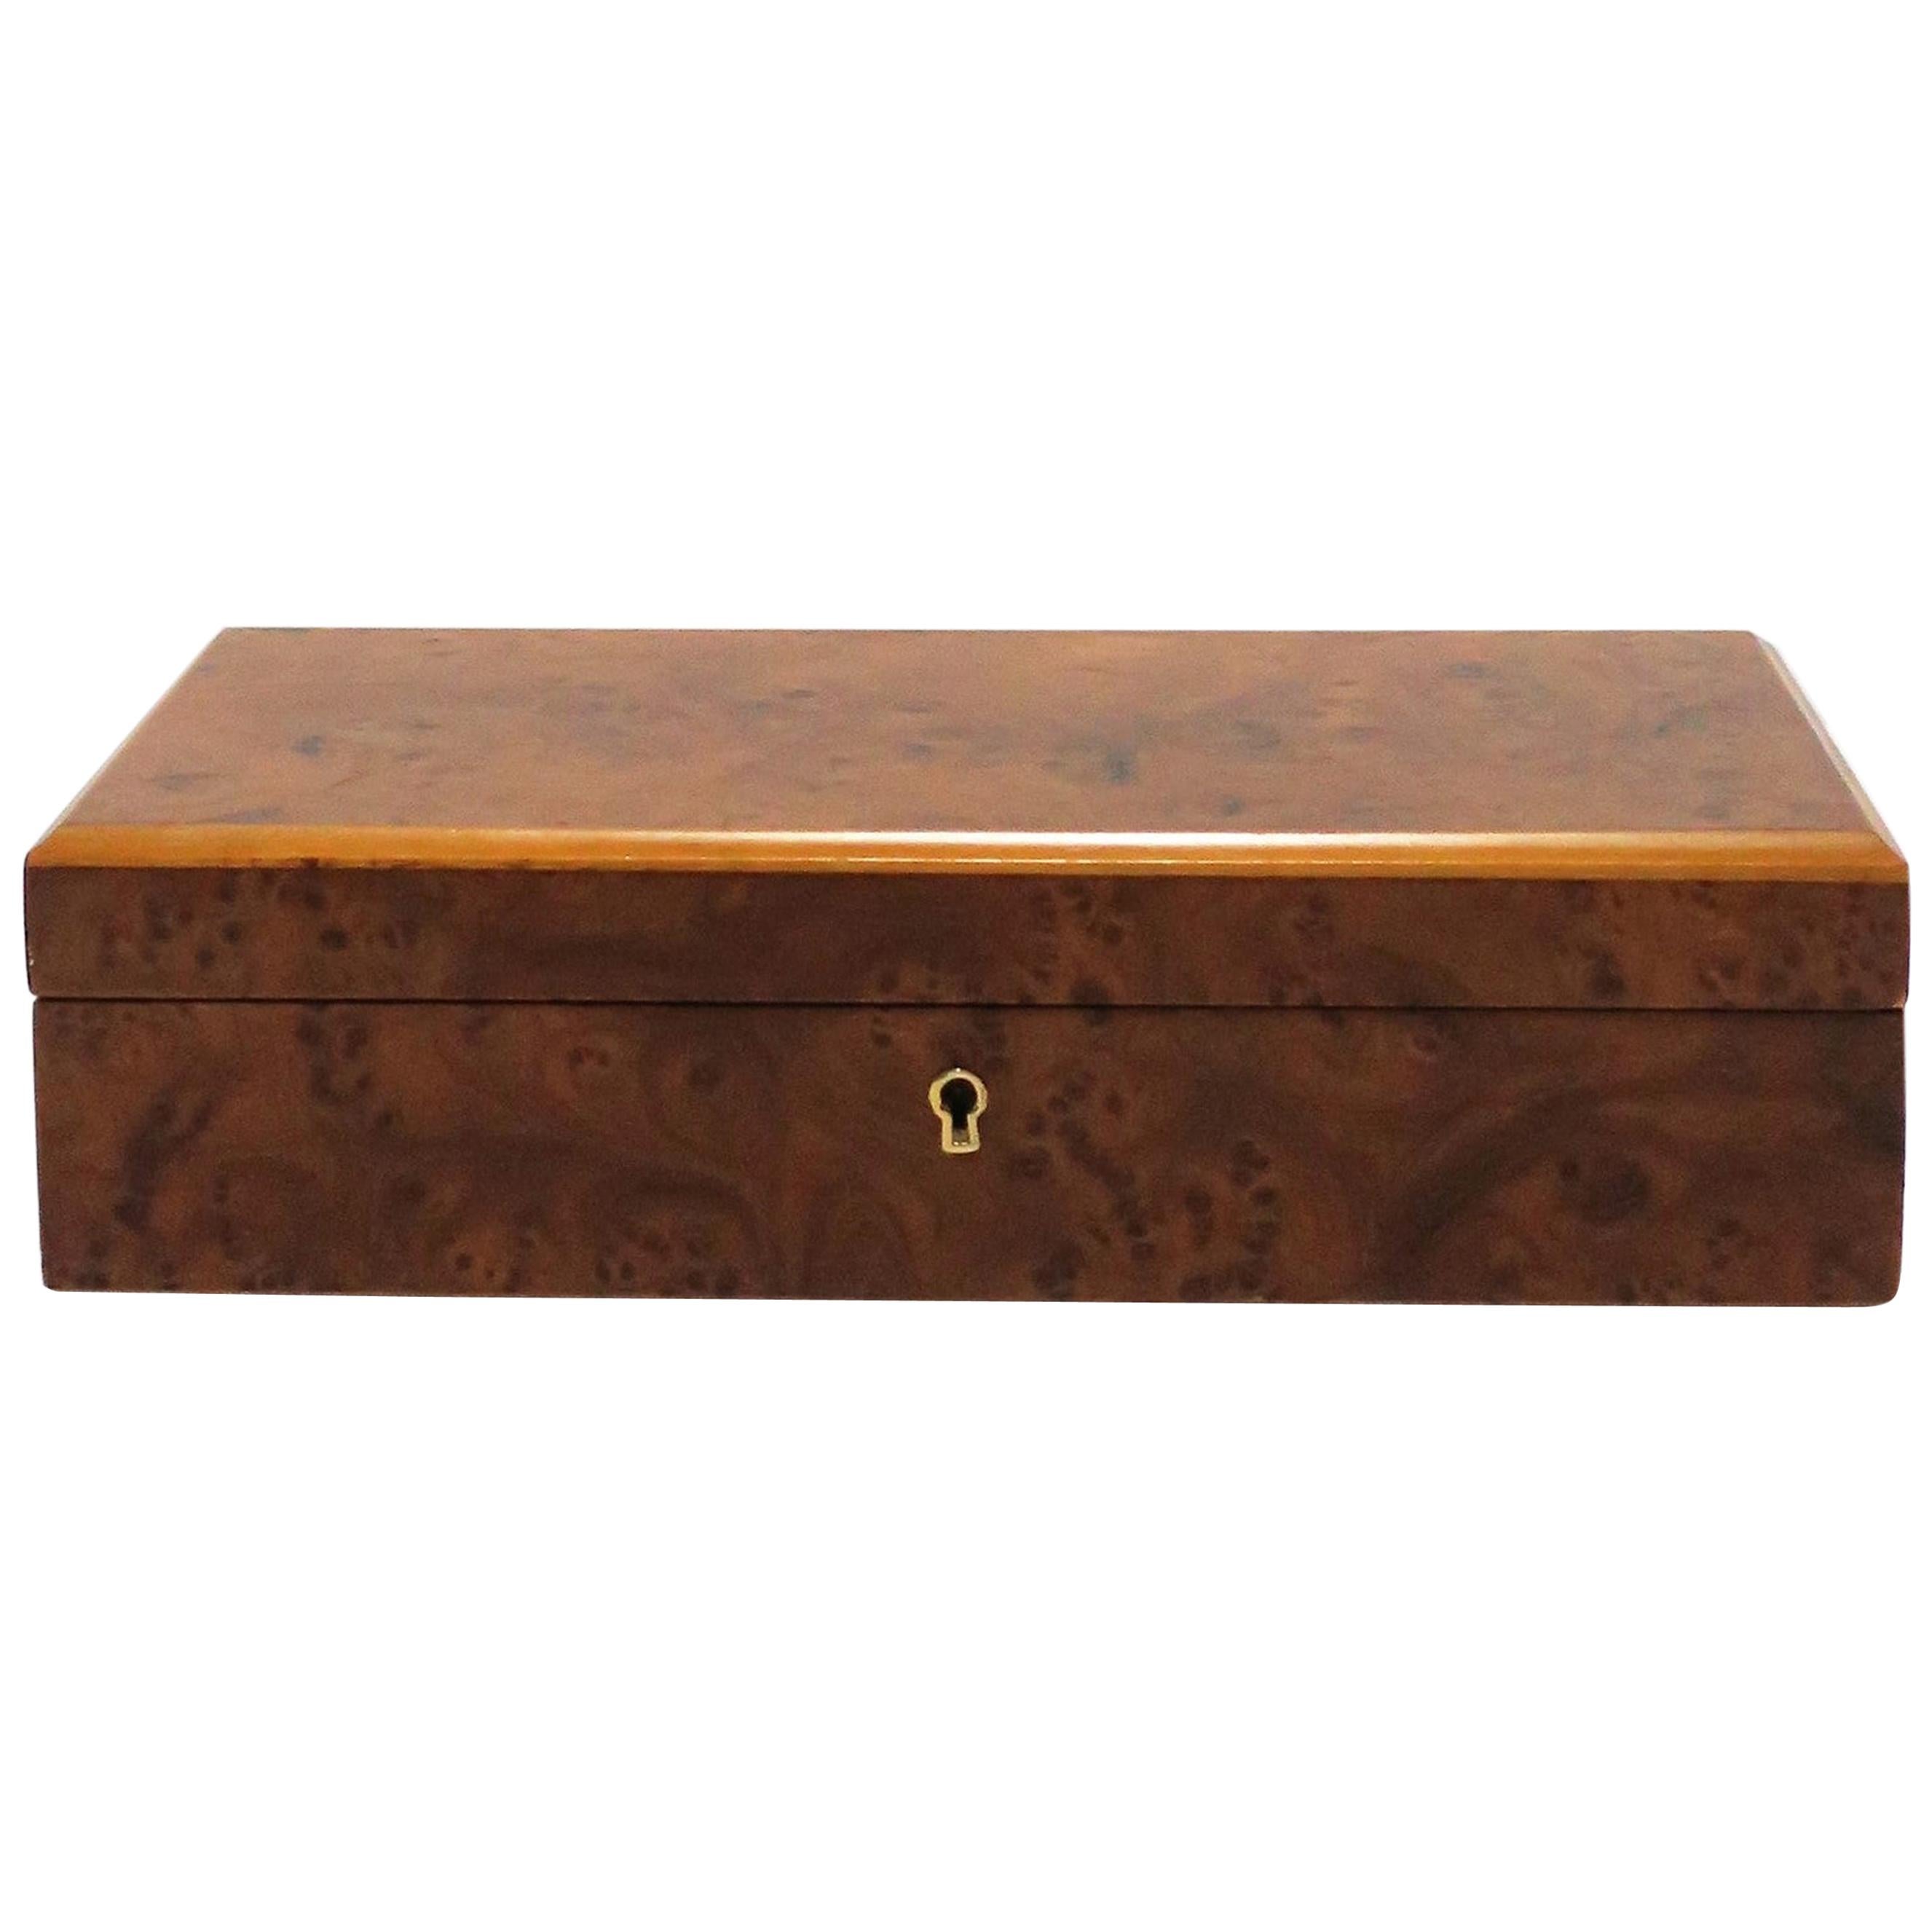 Louis Vuitton Jewelry Boxes - 9 For Sale on 1stDibs